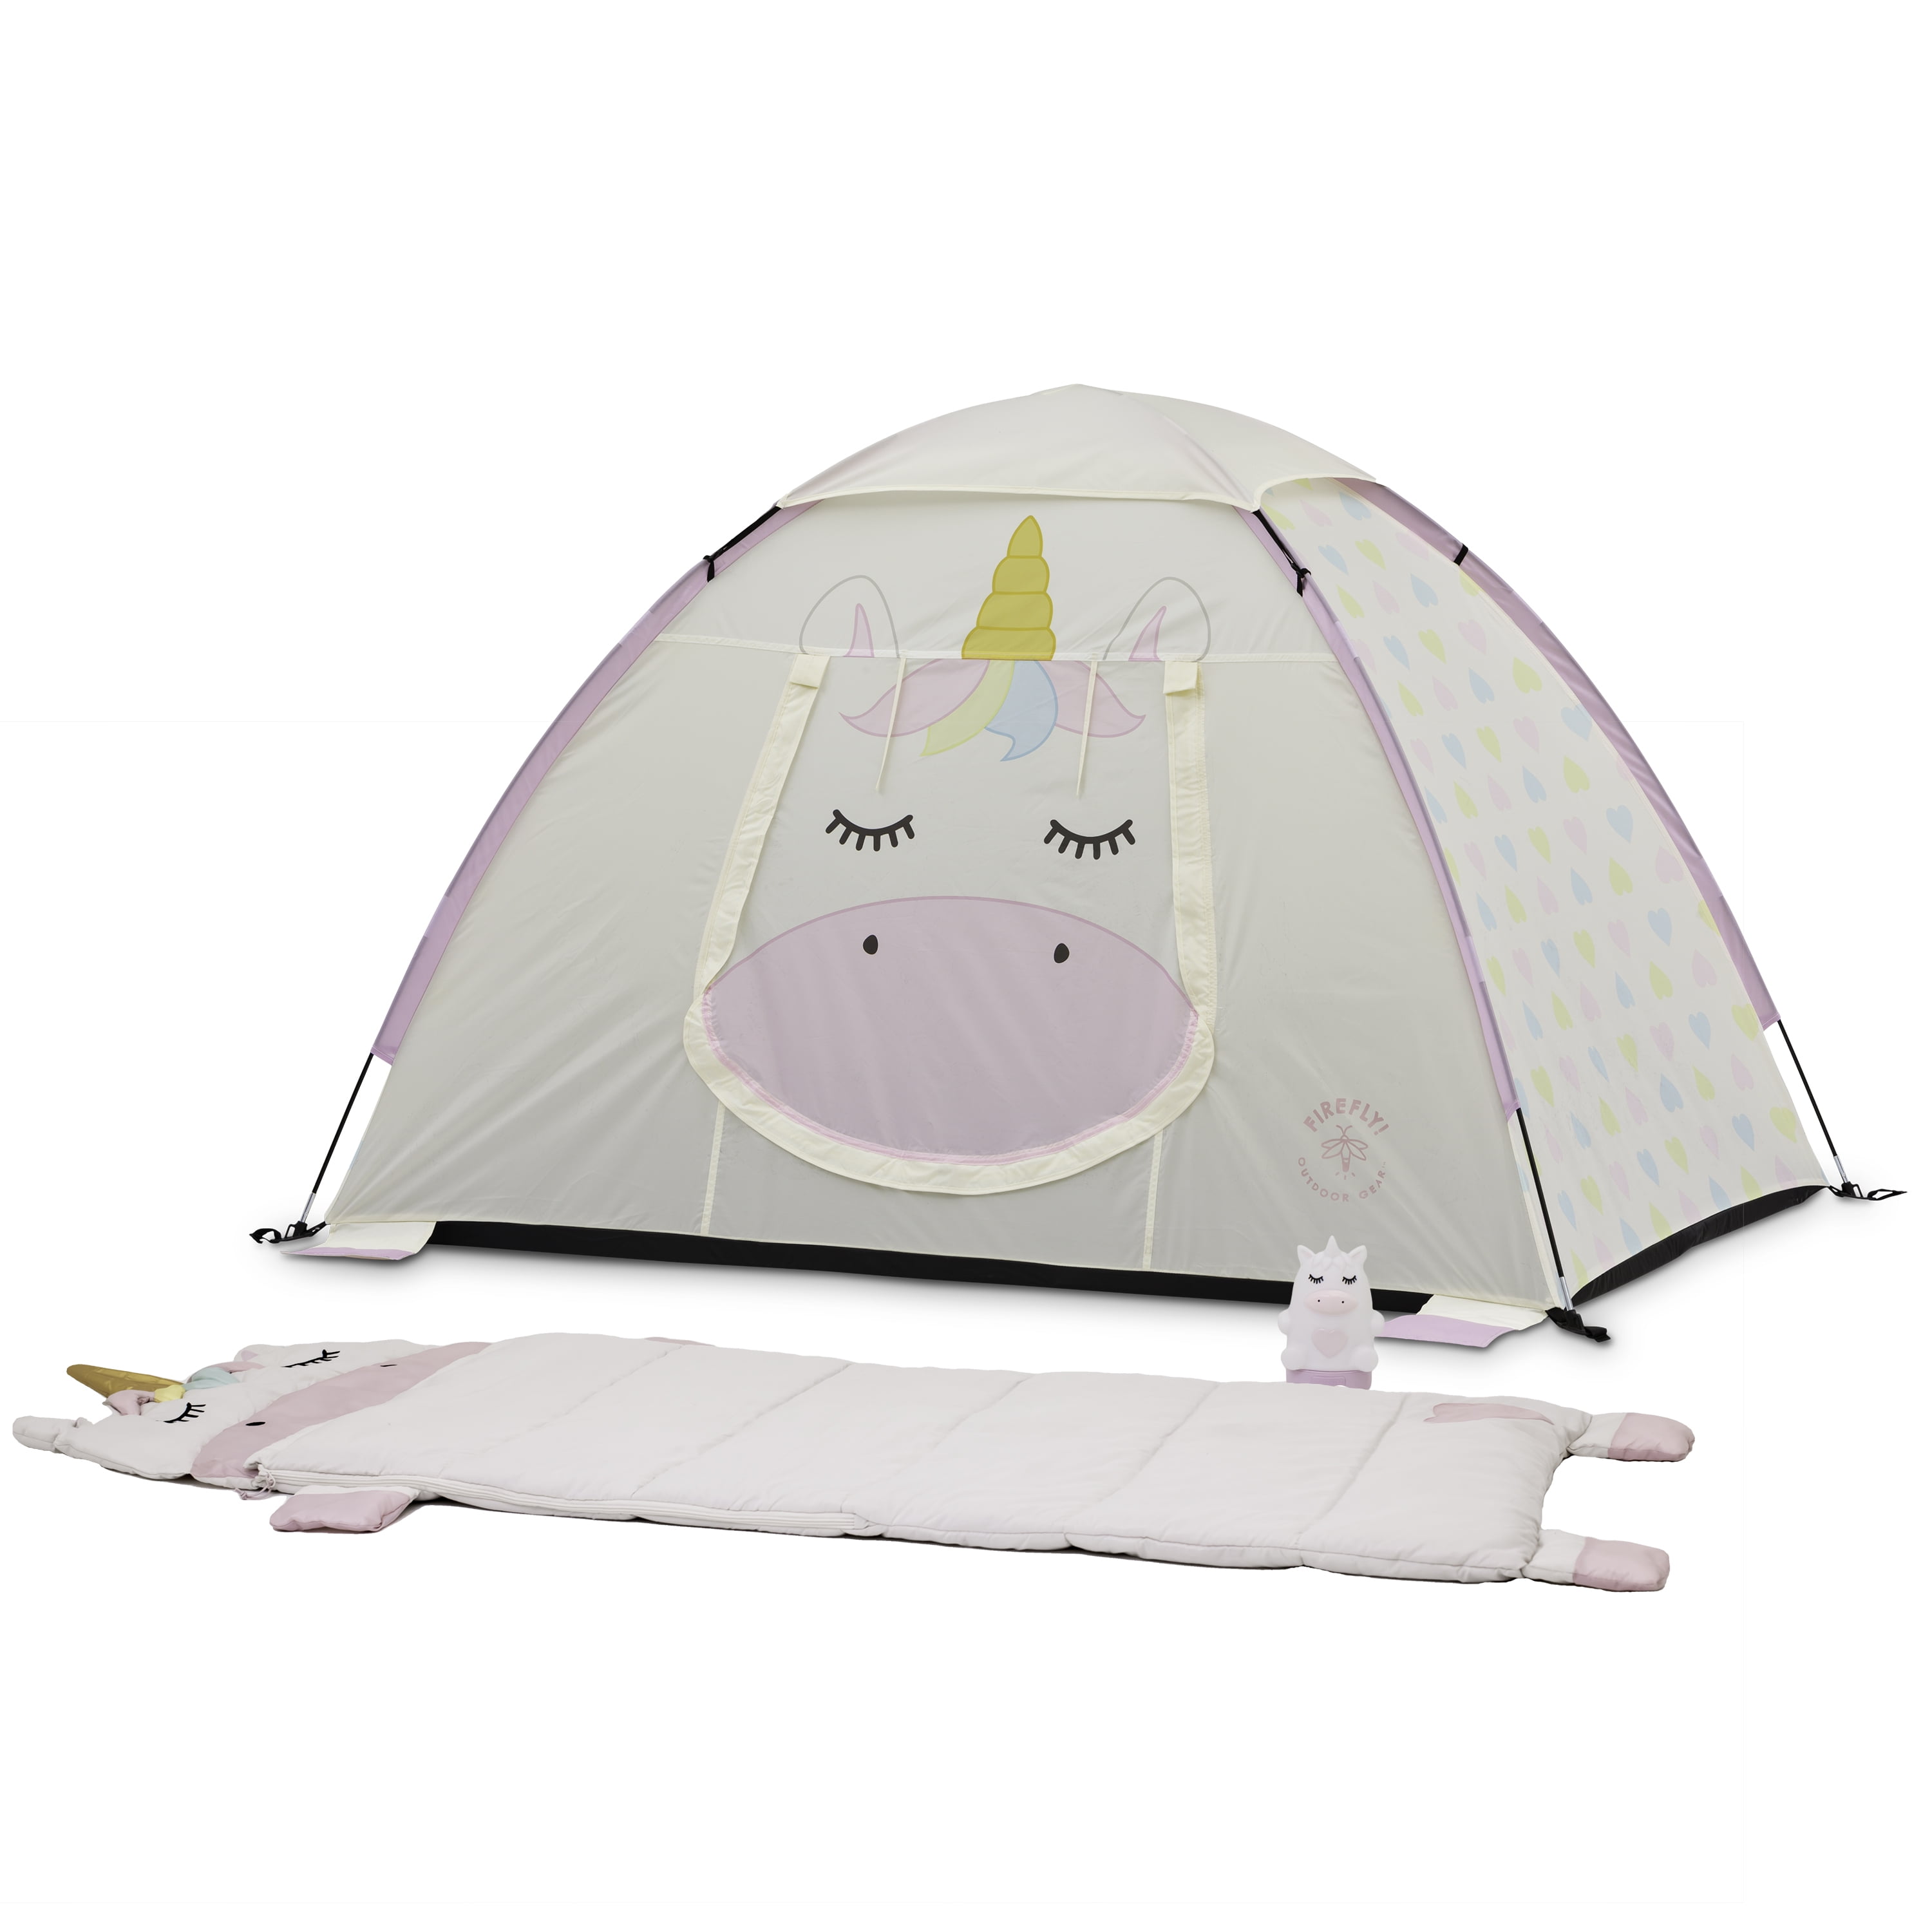 Firefly! Outdoor Gear Kid's Camping Combo (Sparkle the Unicorn) $18.45 + Free S&H w/ Walmart+ or $35+